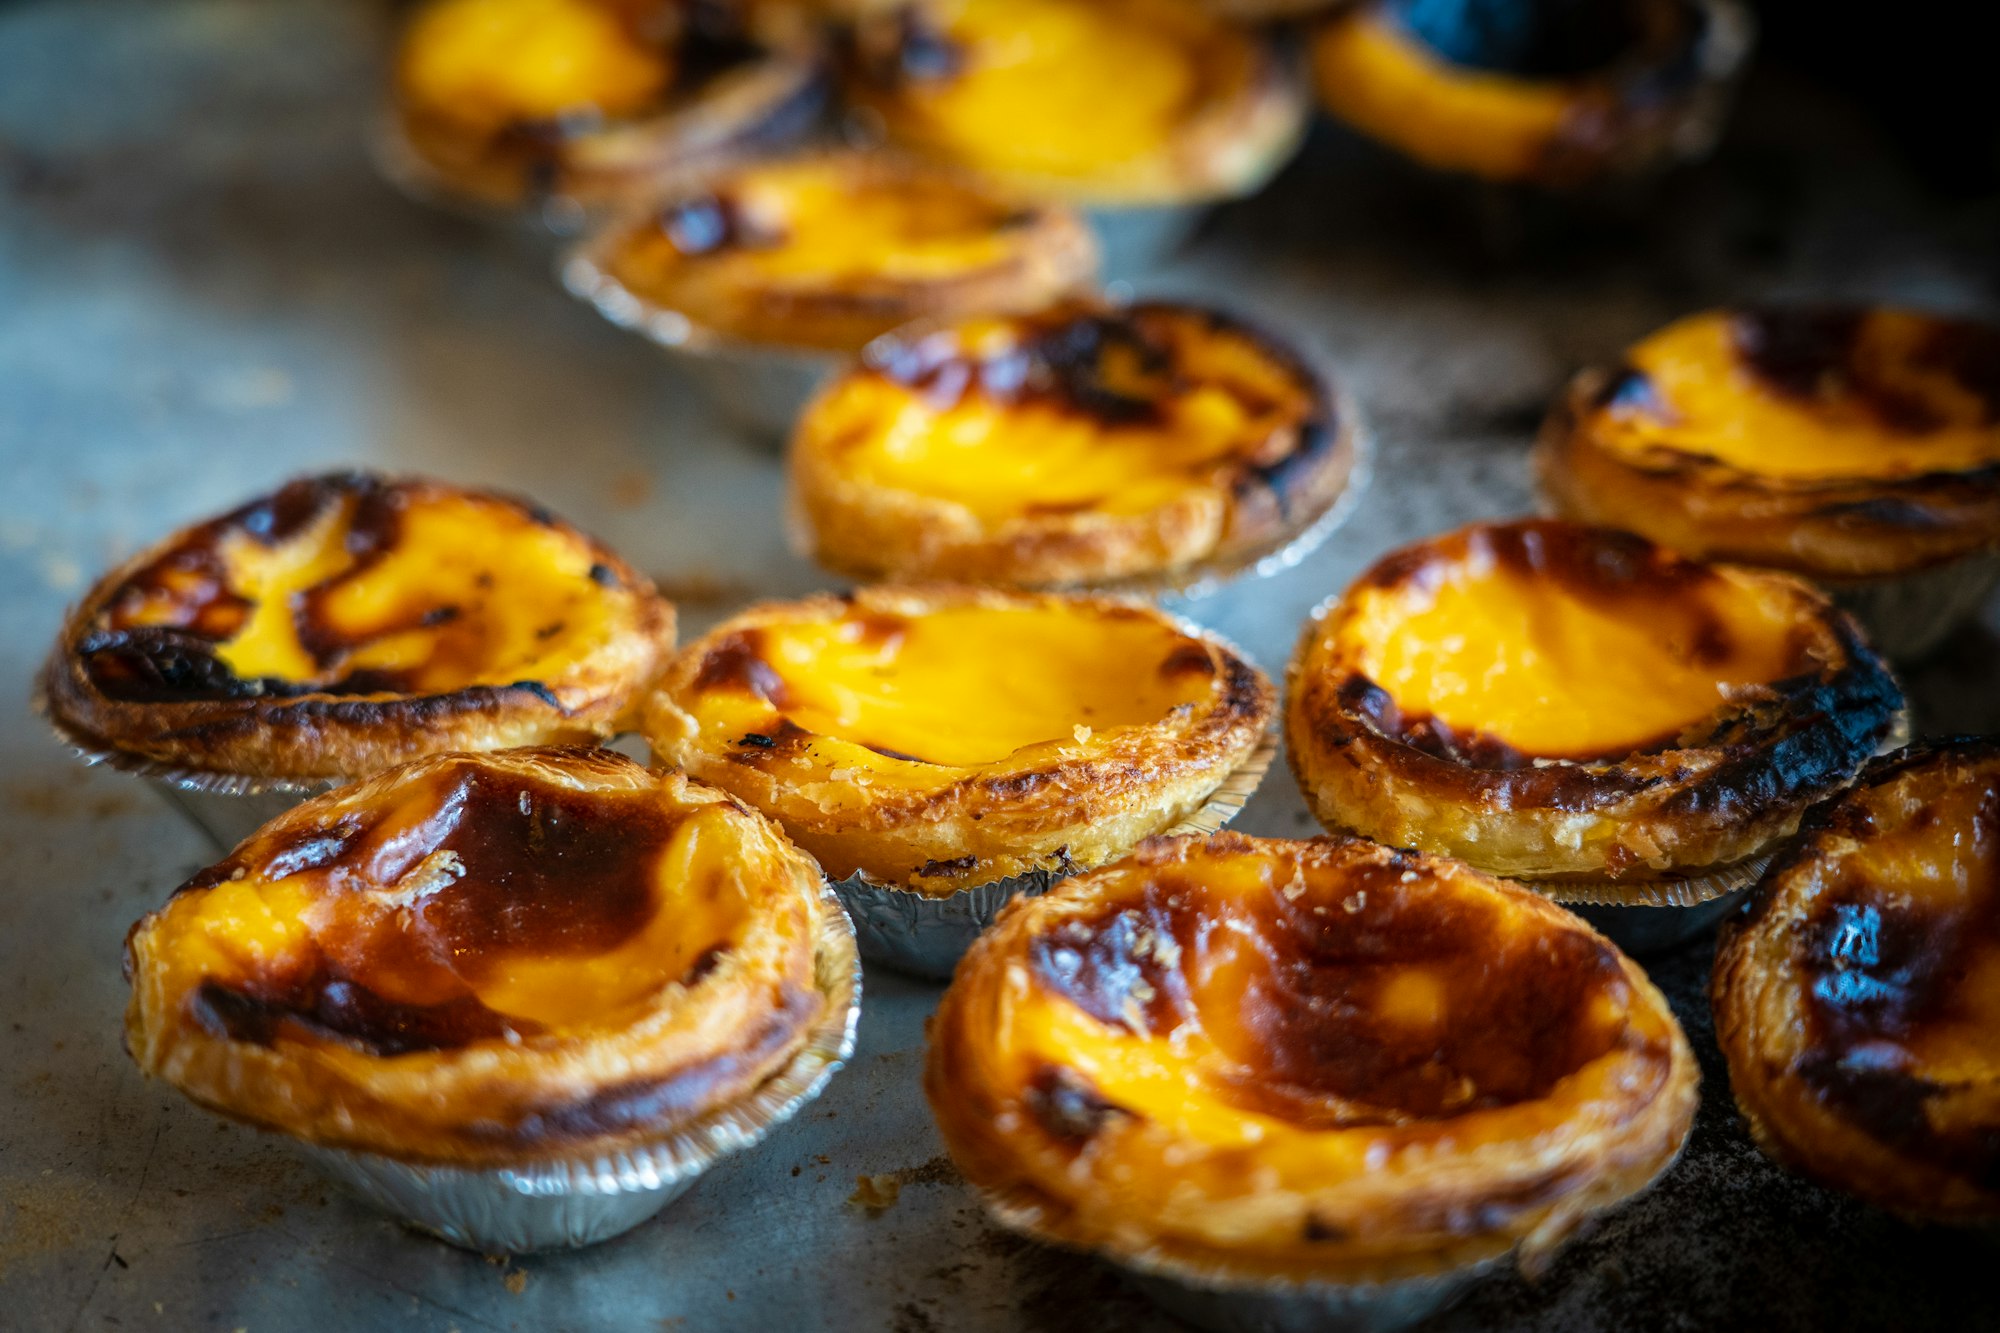 Pastel De Nata is a Portuguese egg tart pastry, dusted with cinnamon.  Our local tapas restaurant bakes them on a daily basis and they are a real treat.